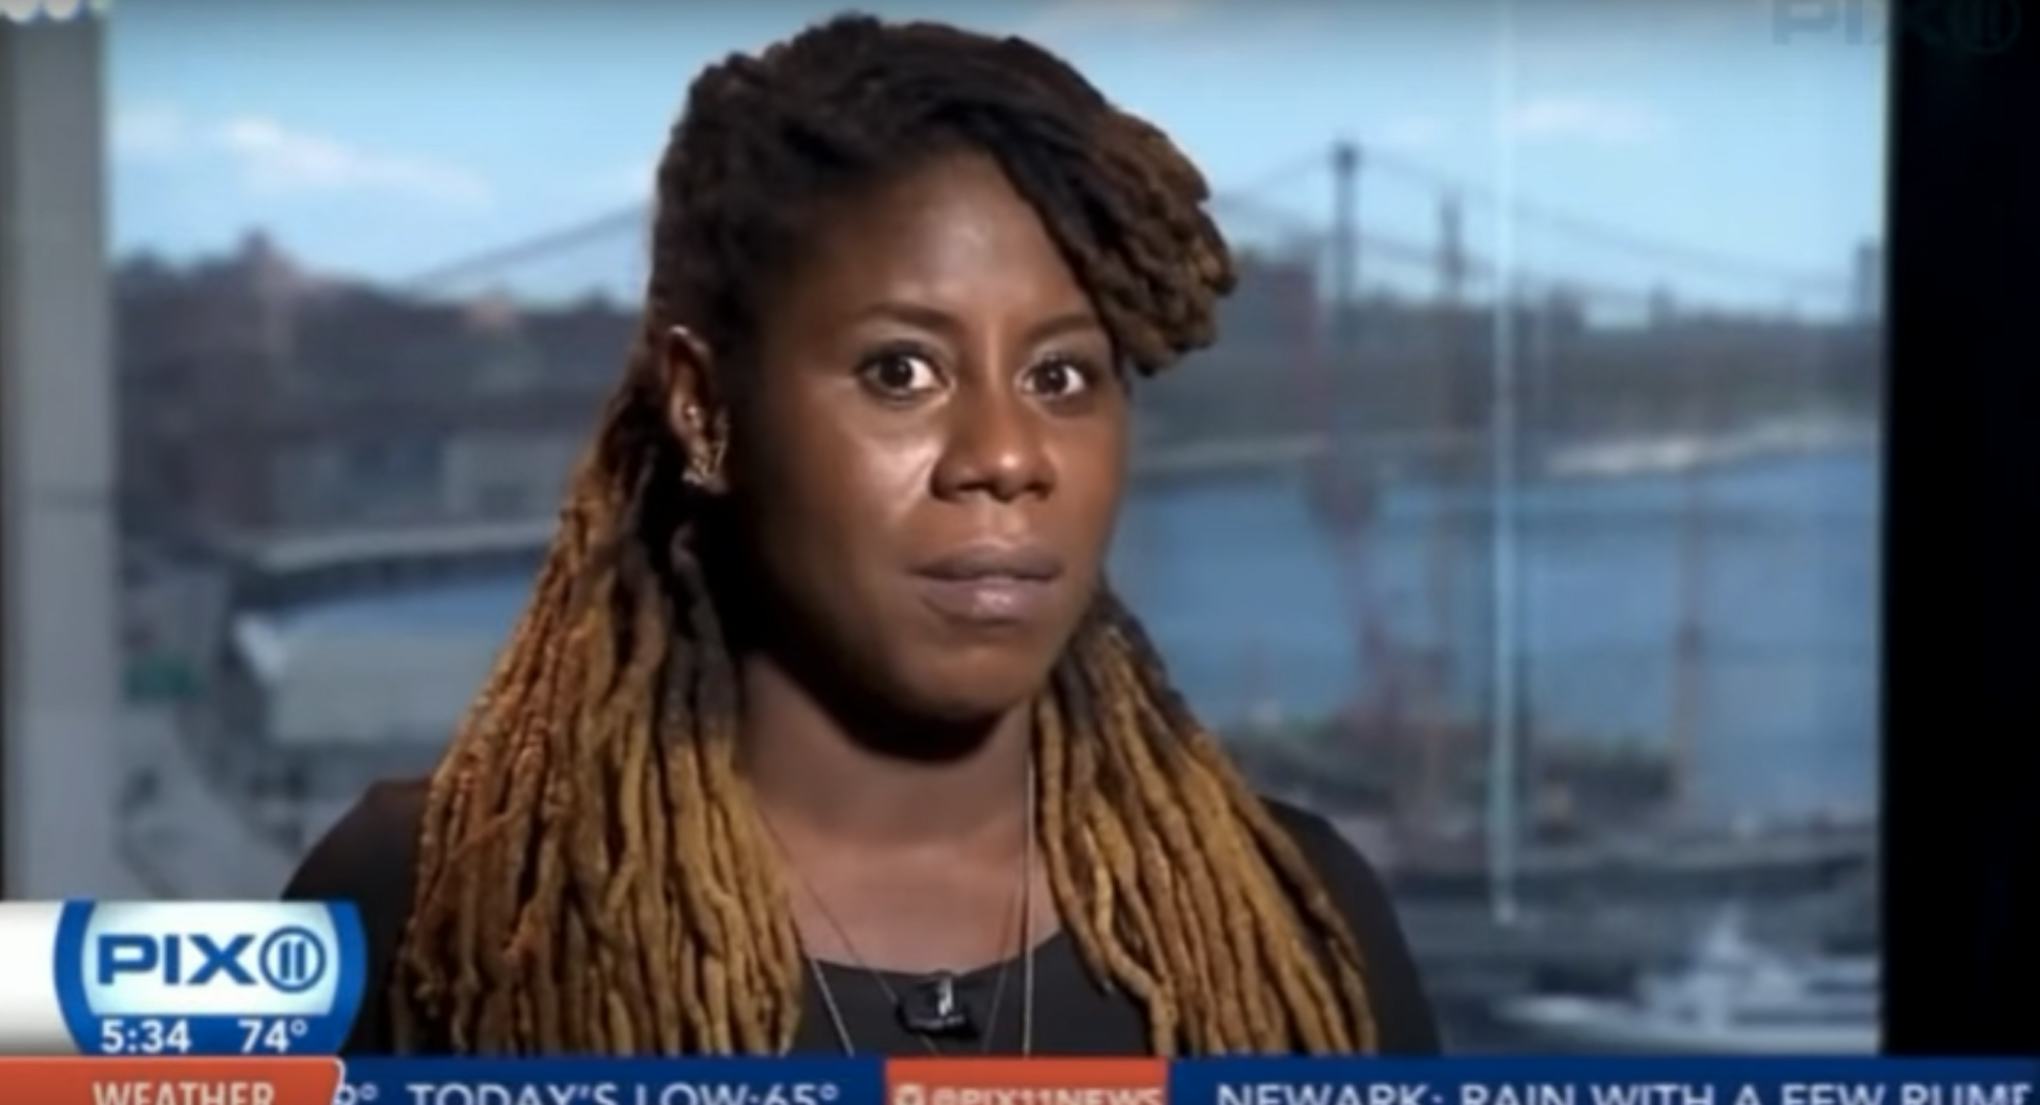 Kamilah Brock Spent 8 Days In A New York Mental Health Facility Because